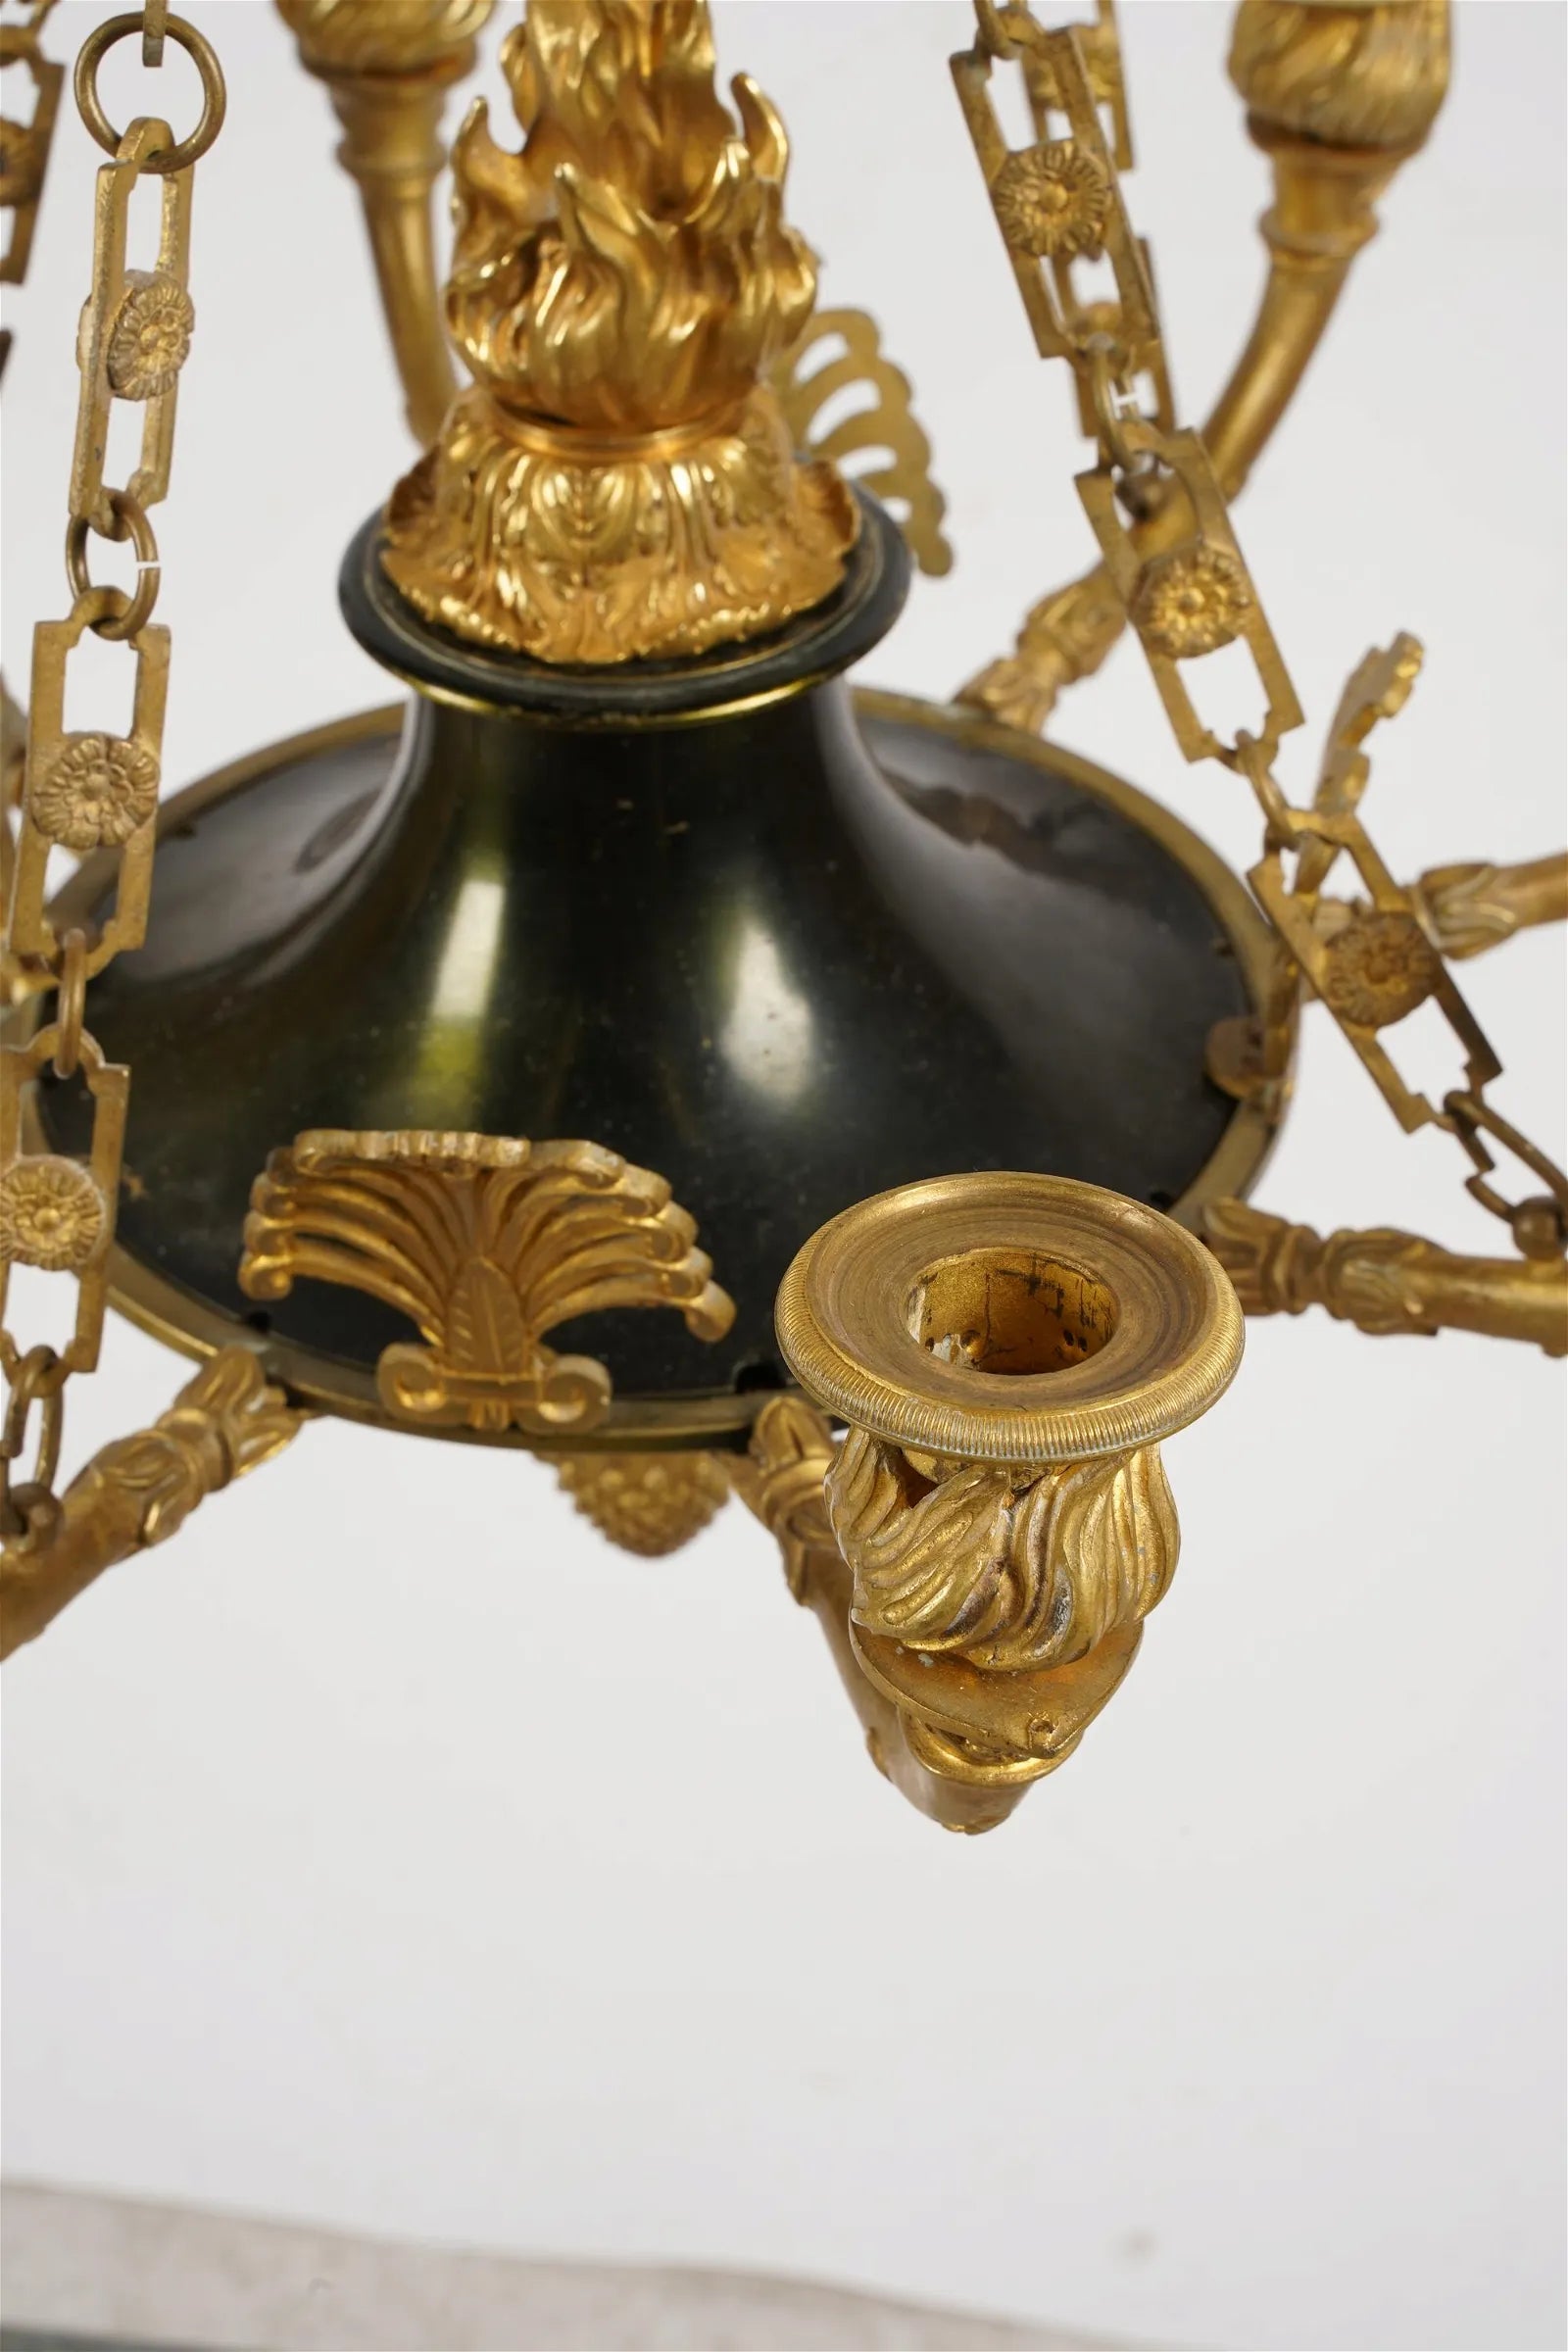 AL1-061: EARLY 20TH CENTURY FRENCH EMPIRE STYLE GILT METAL 8 LIGHT CHANDELIER